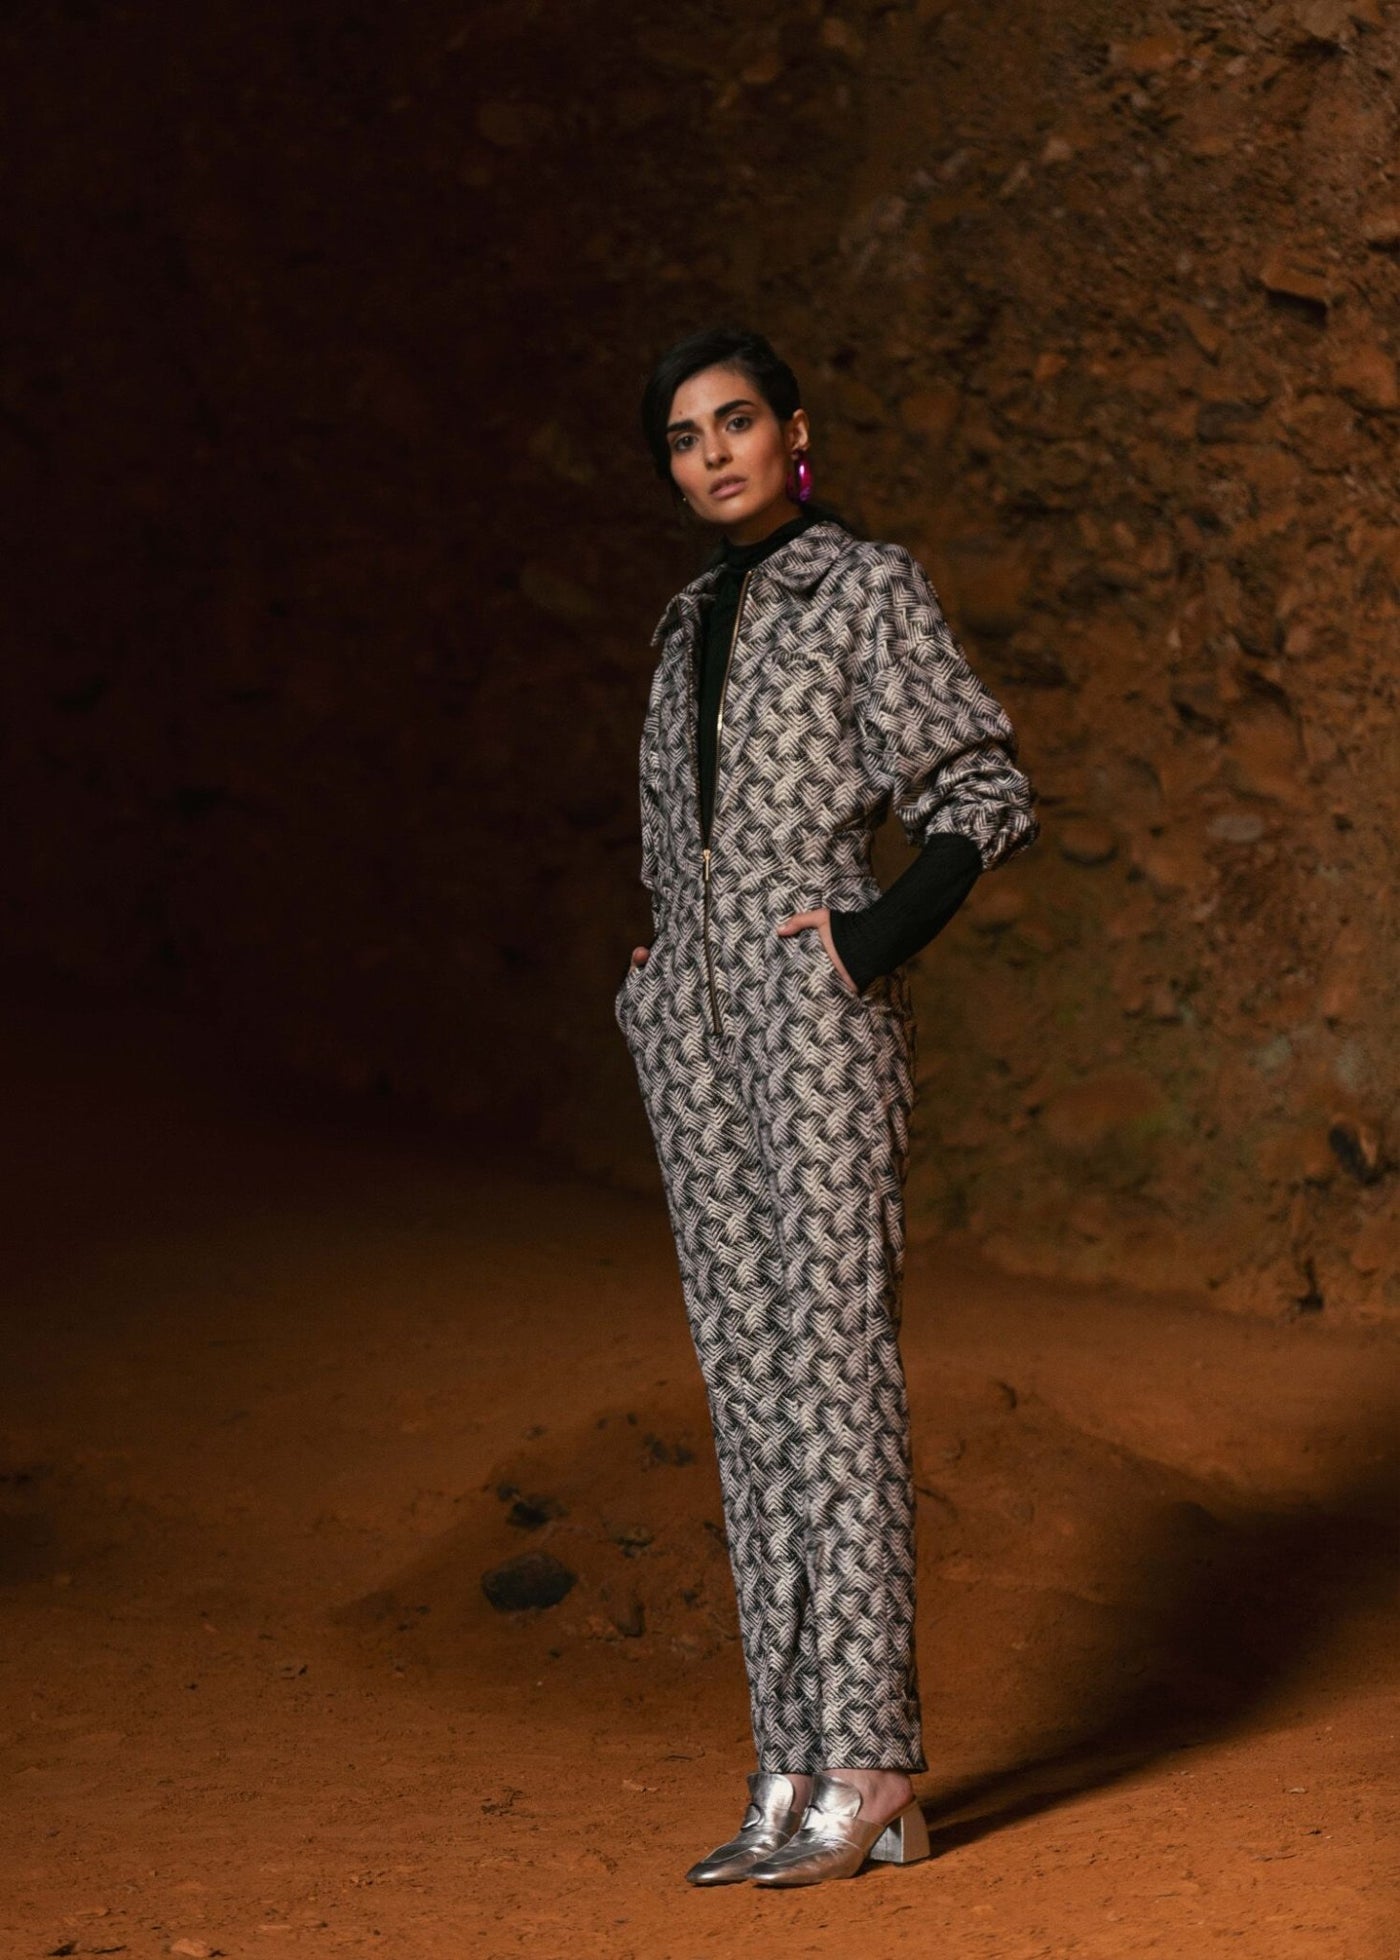 Jacquard Glitter Jumpsuit - The Clothing LoungeNOPIN